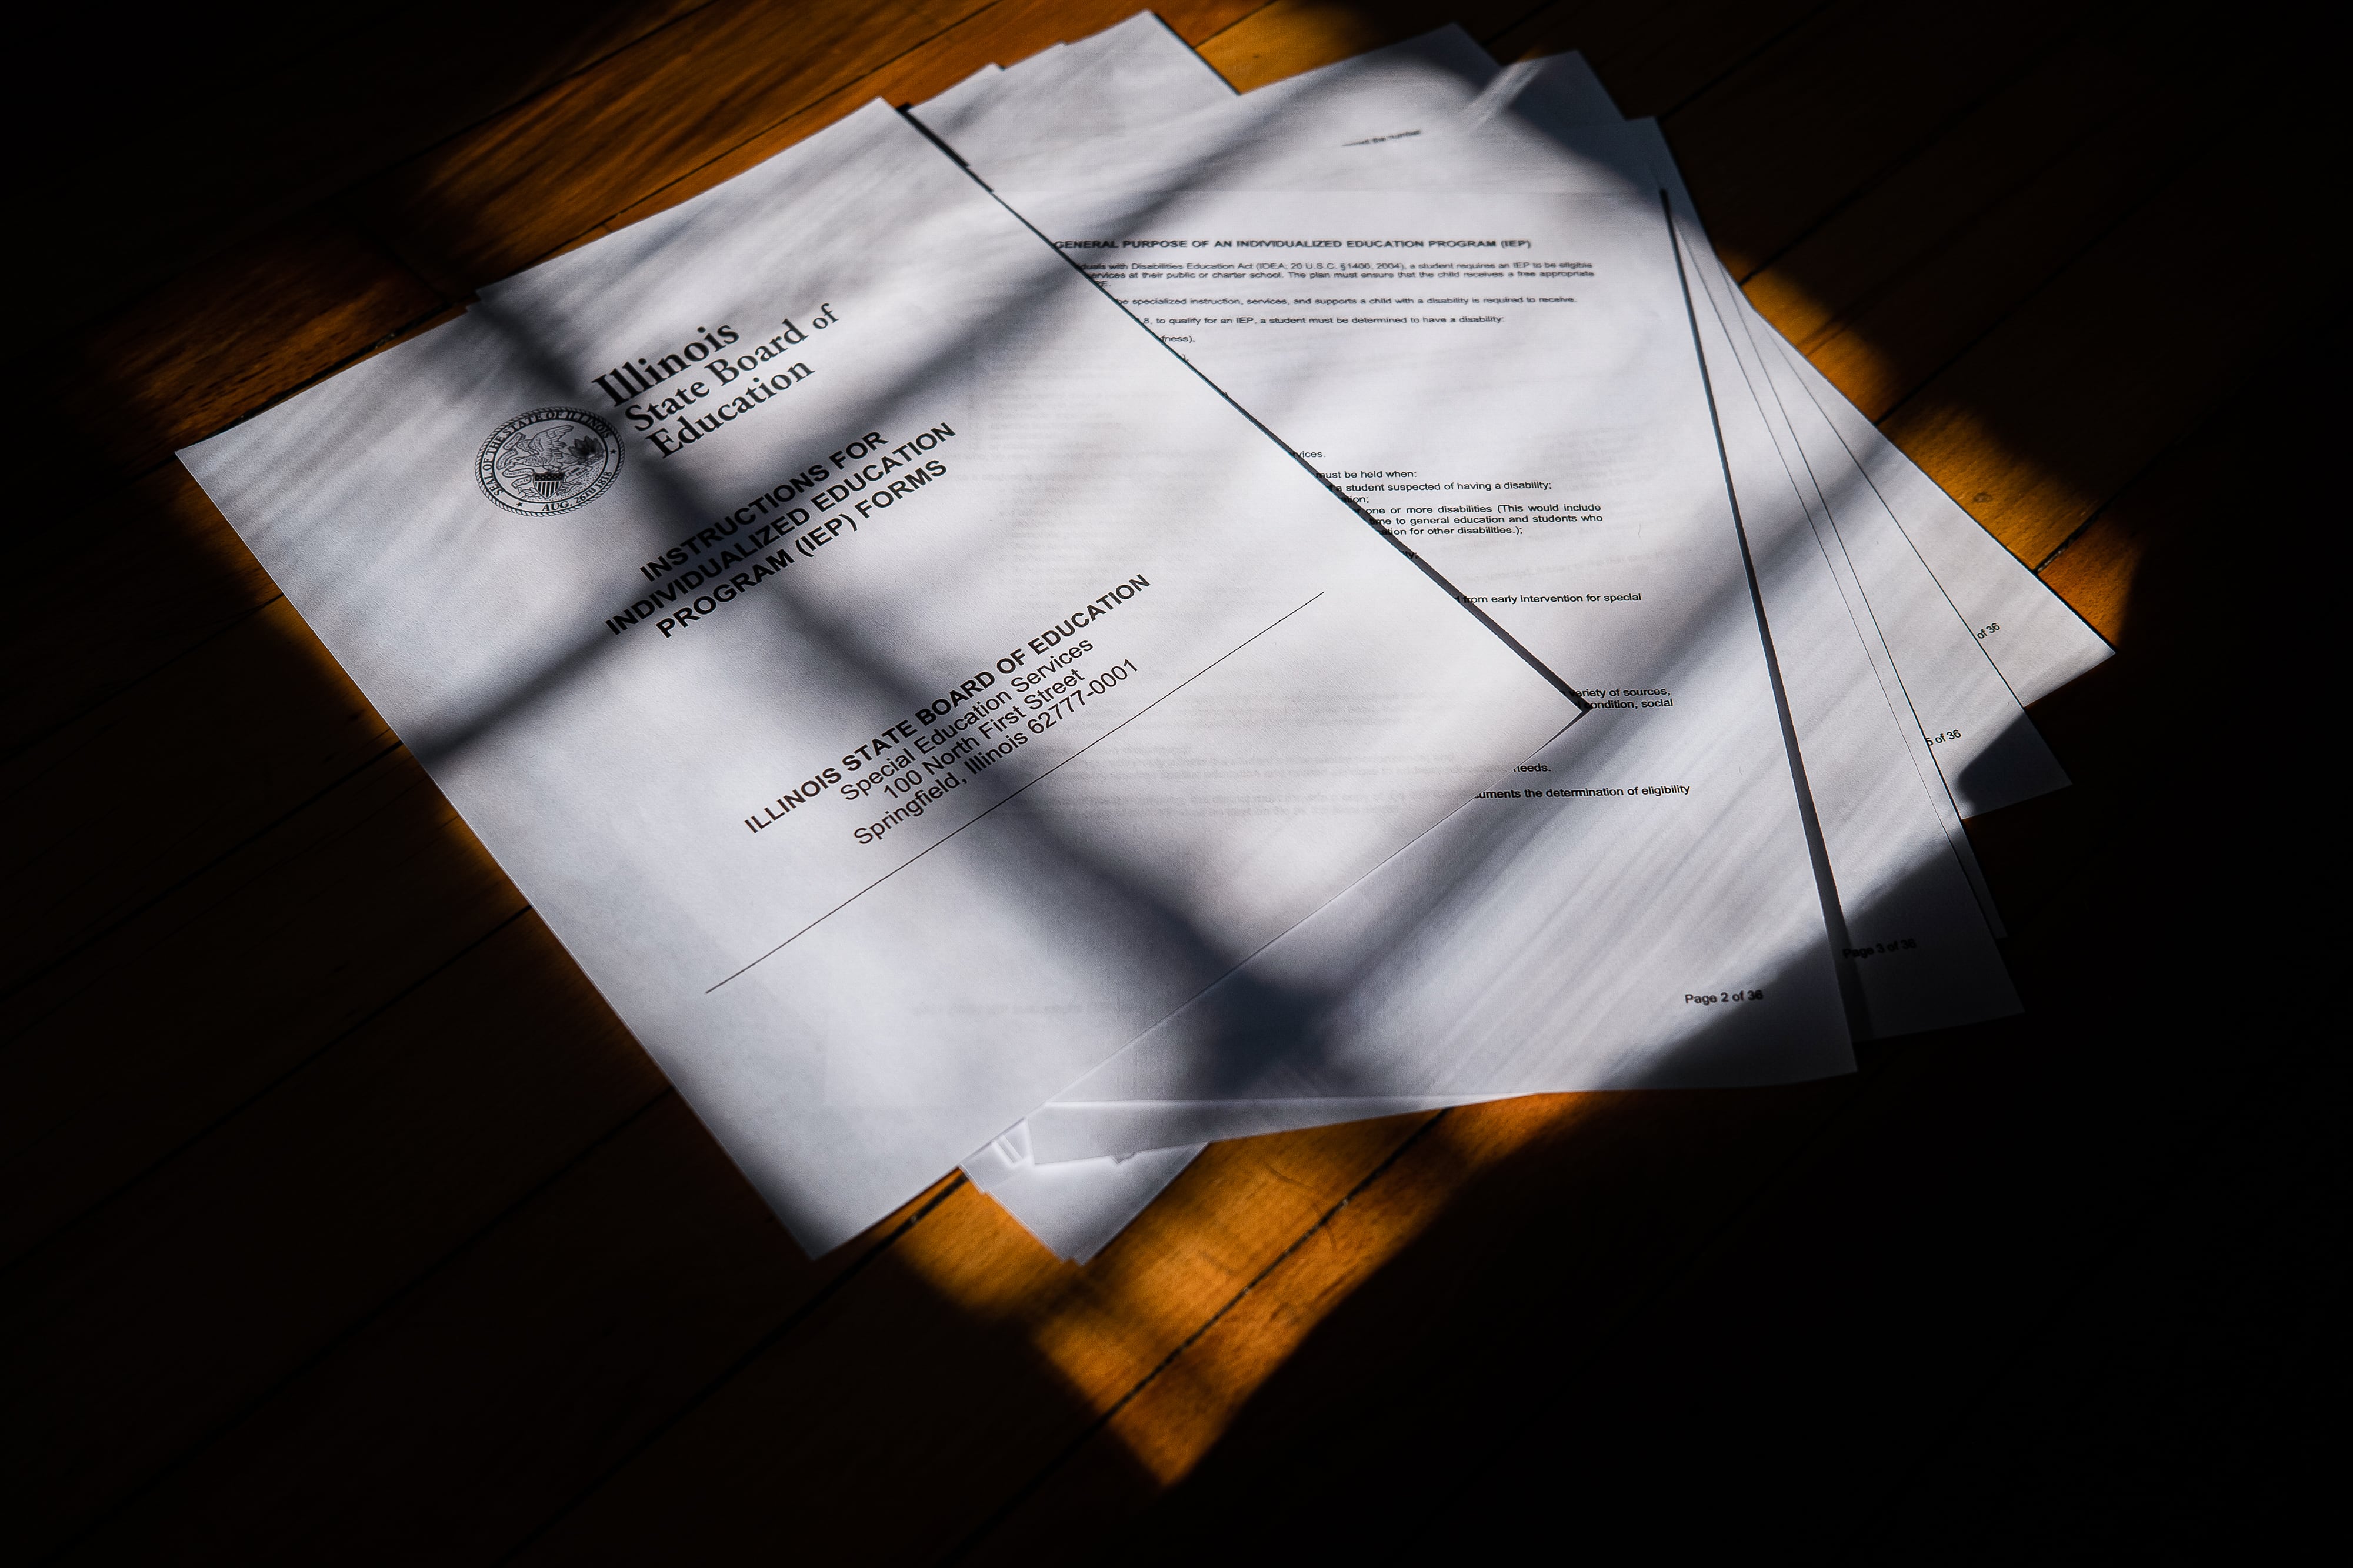 Informational documents from the Illinois State Board of Education on Individualized Education Program (IEP) forms are partially obscured by shadows.